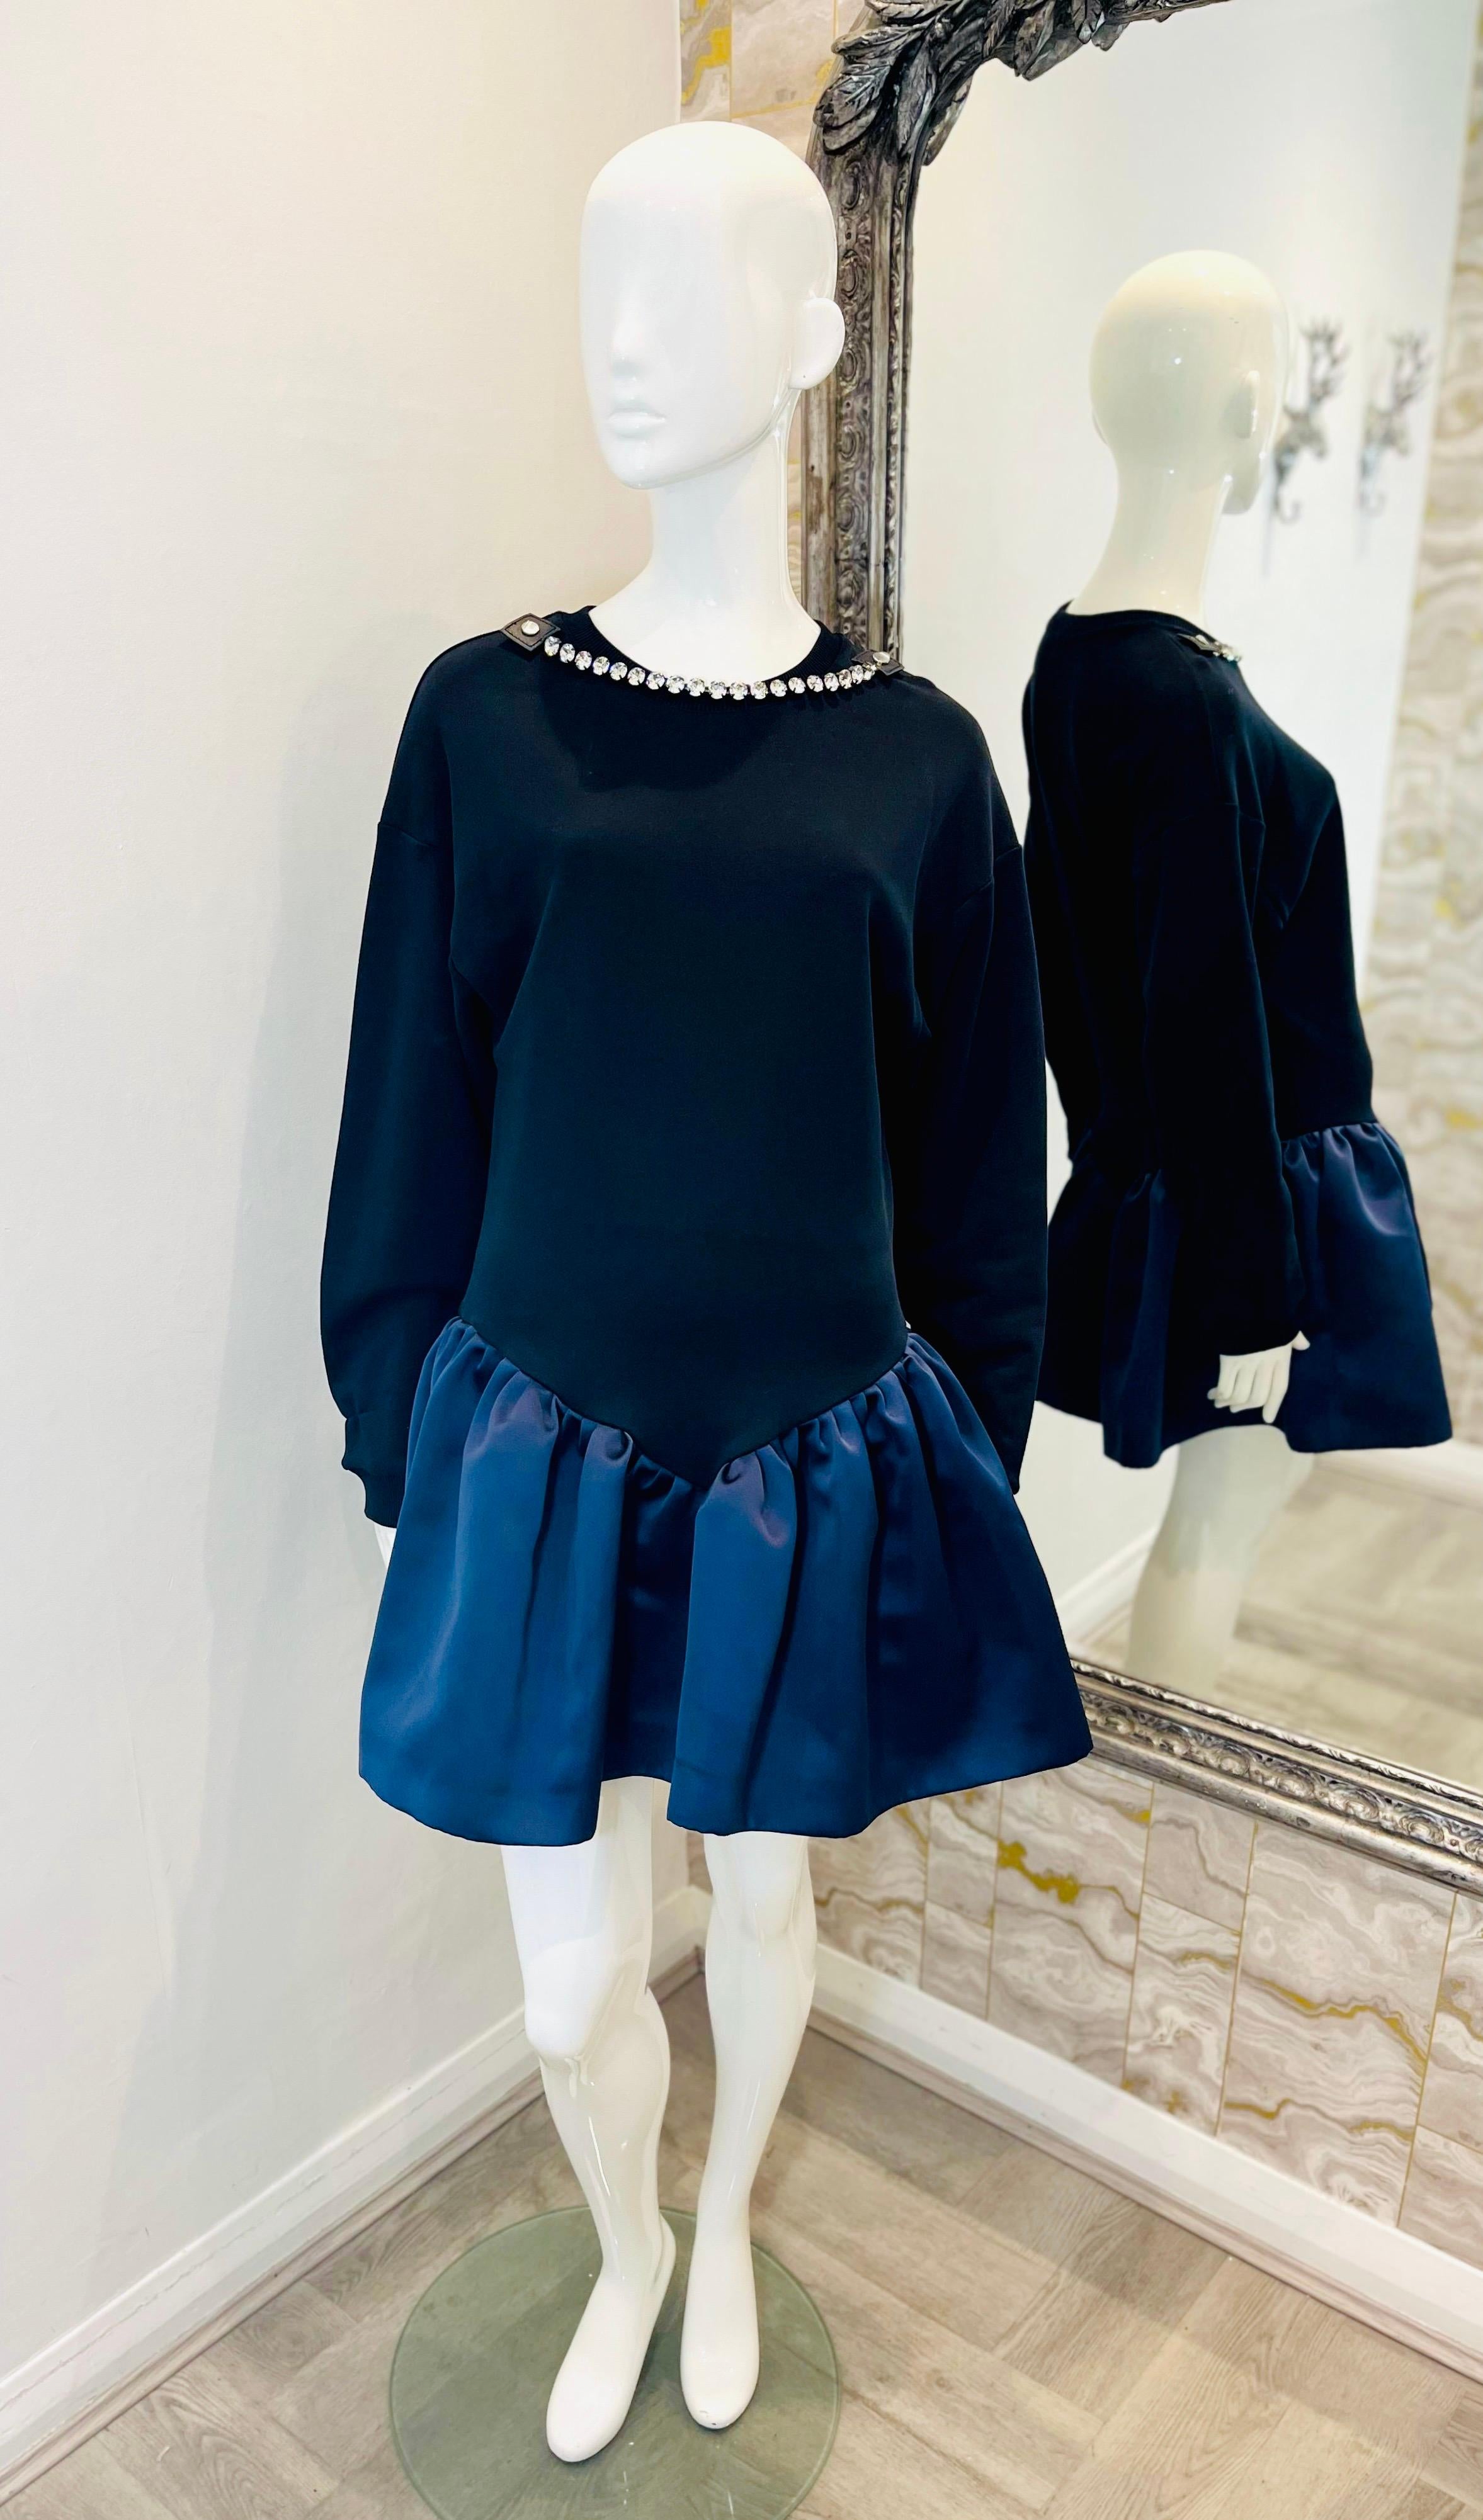 Christopher Kane Cotton Sweatshirt Dress

Mini dress designed with sweatshirt top and navy, gathered A-Line skirt.

Detailed with detachable crystal necklace detail to the crew neckline.

Featuring loose fit, long sleeves and ribbed neck and cuffs.